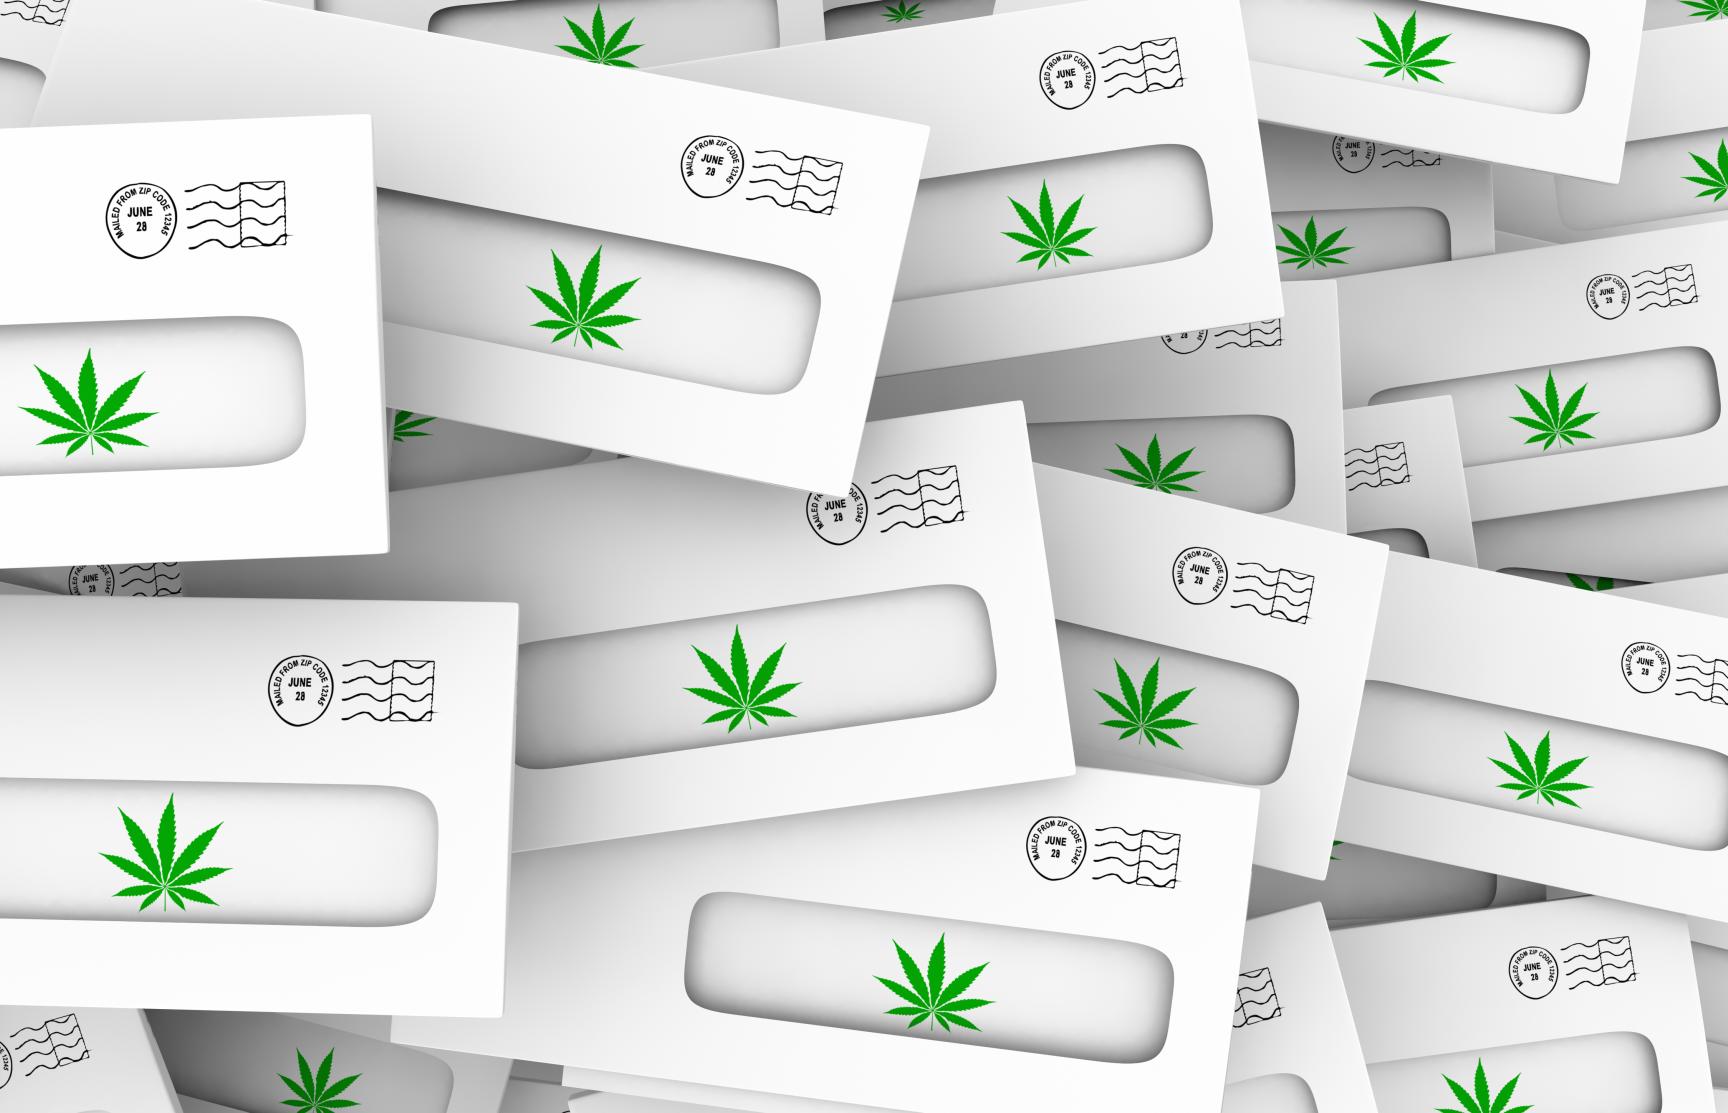 Selling Cannabis Online